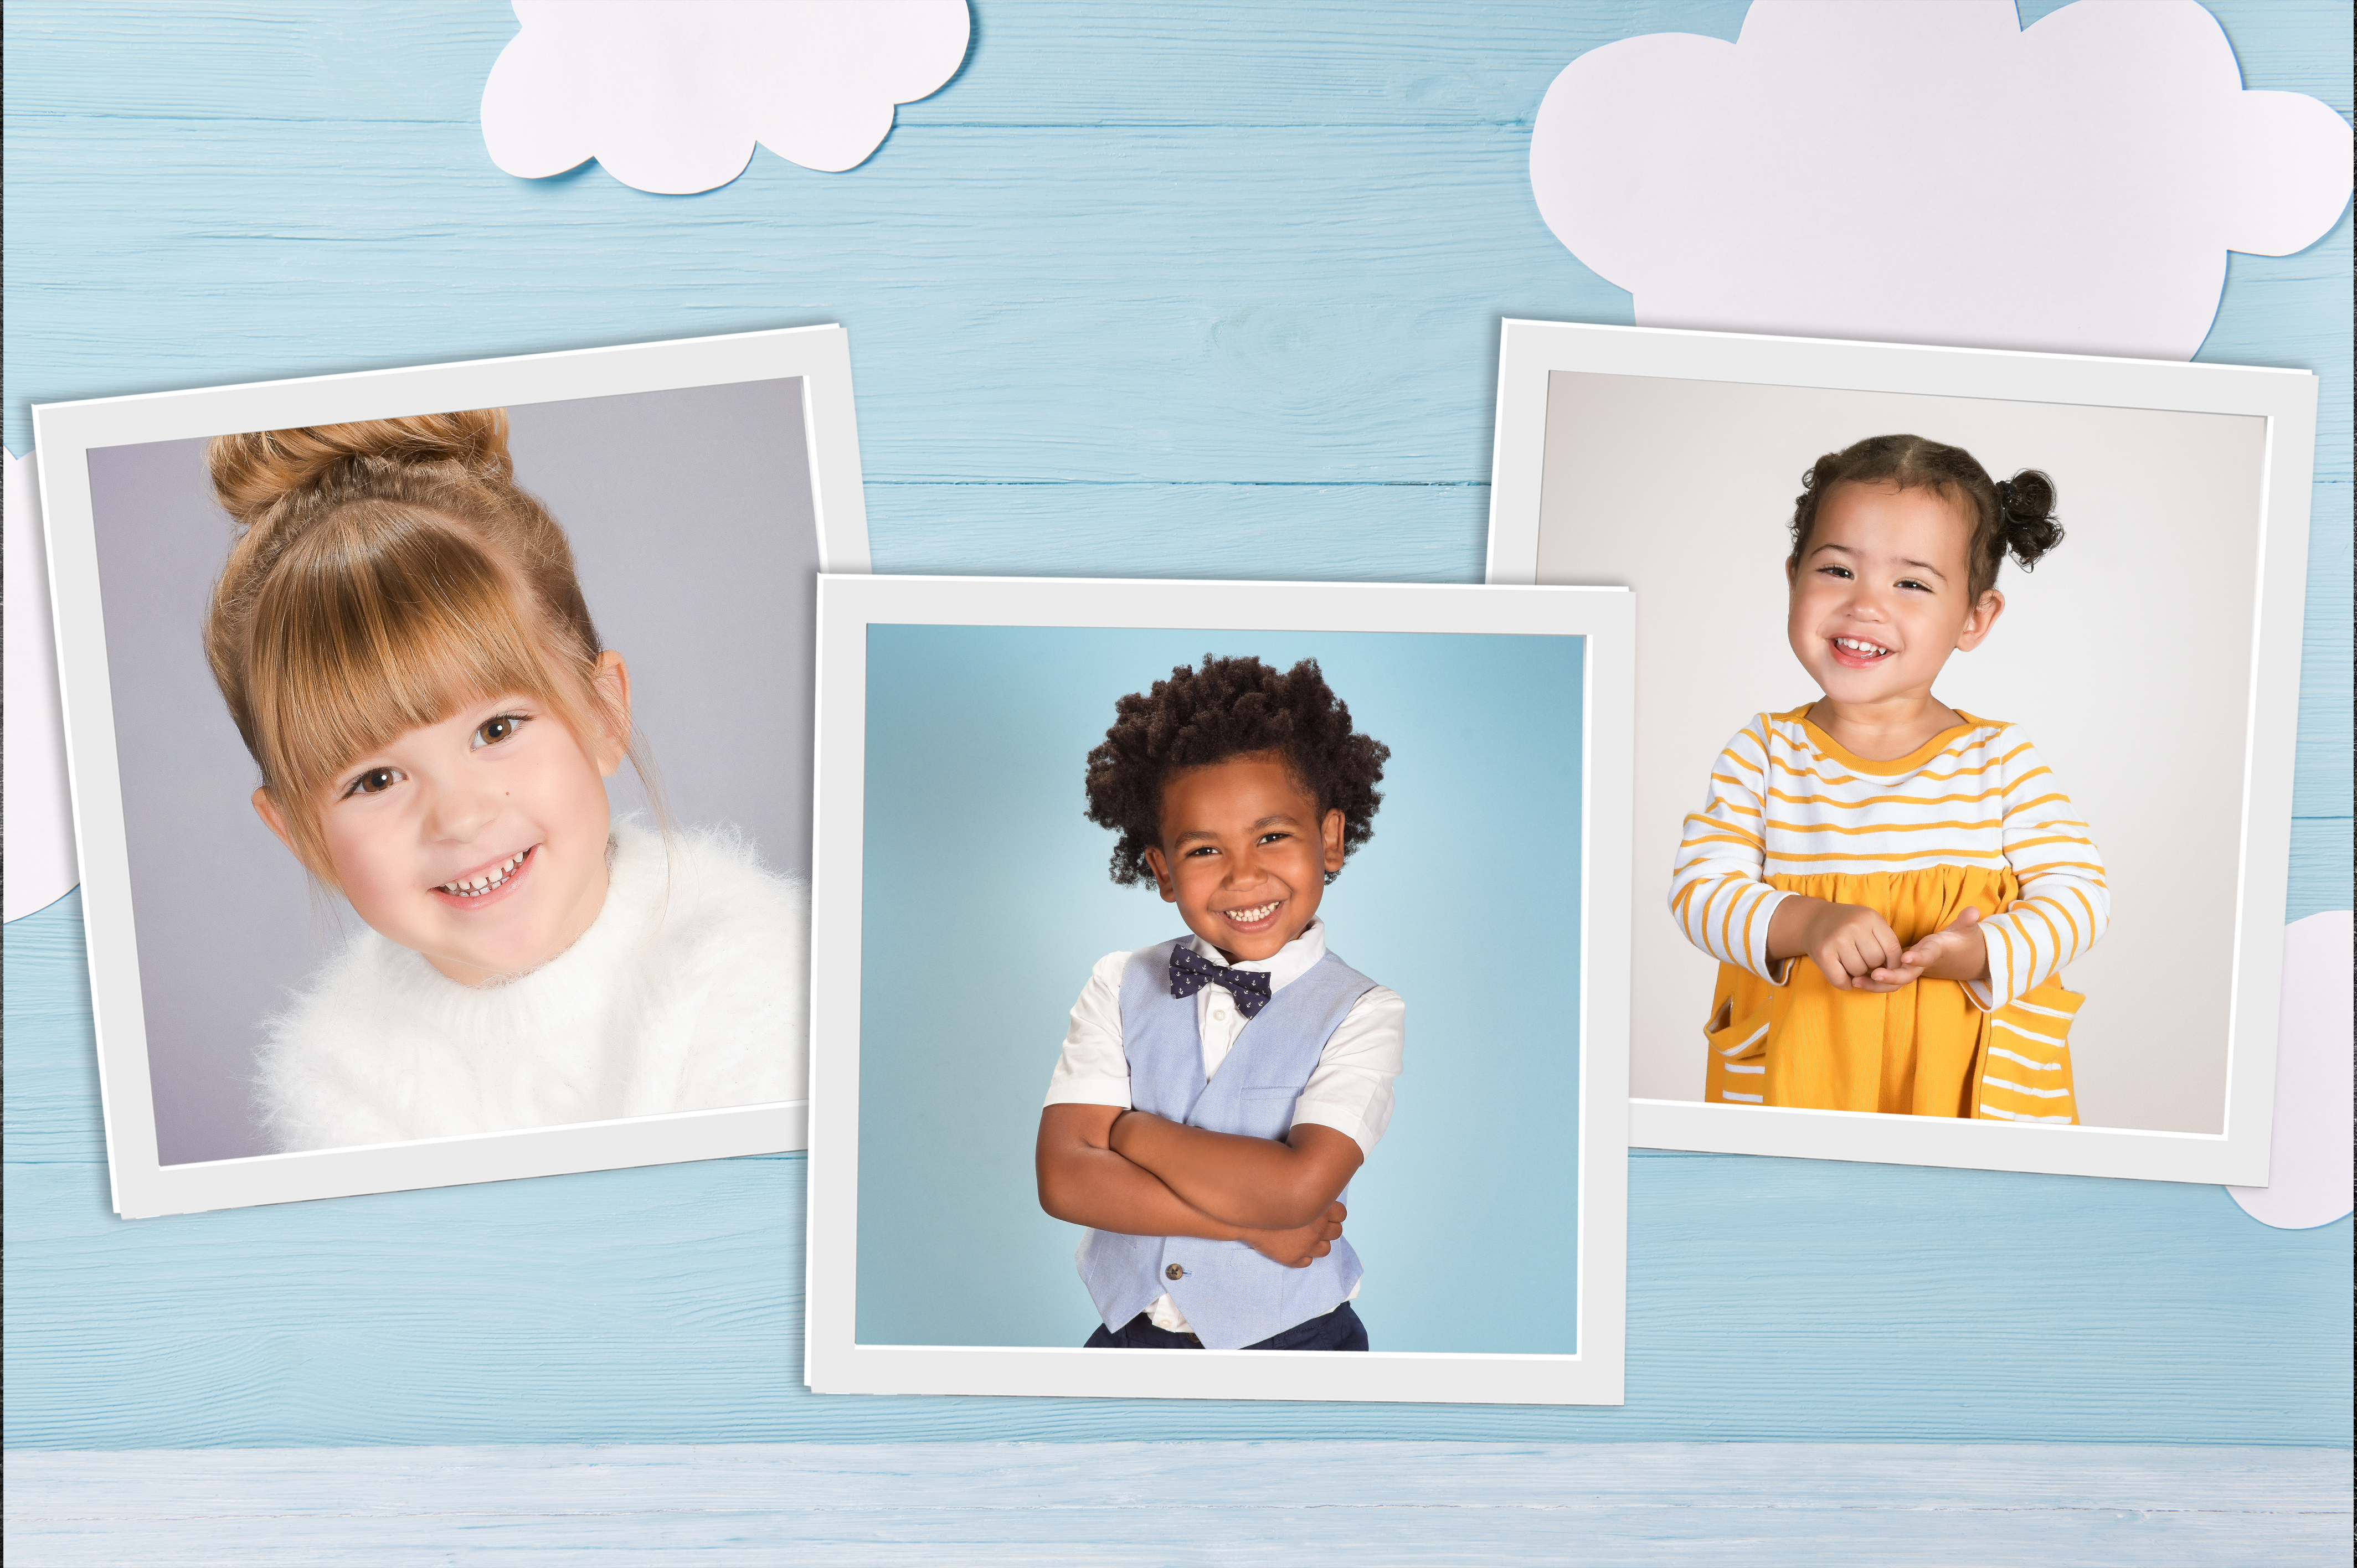 Picture day images of children on a cloud sky background. Article theme is easy hairstyles for picture day.